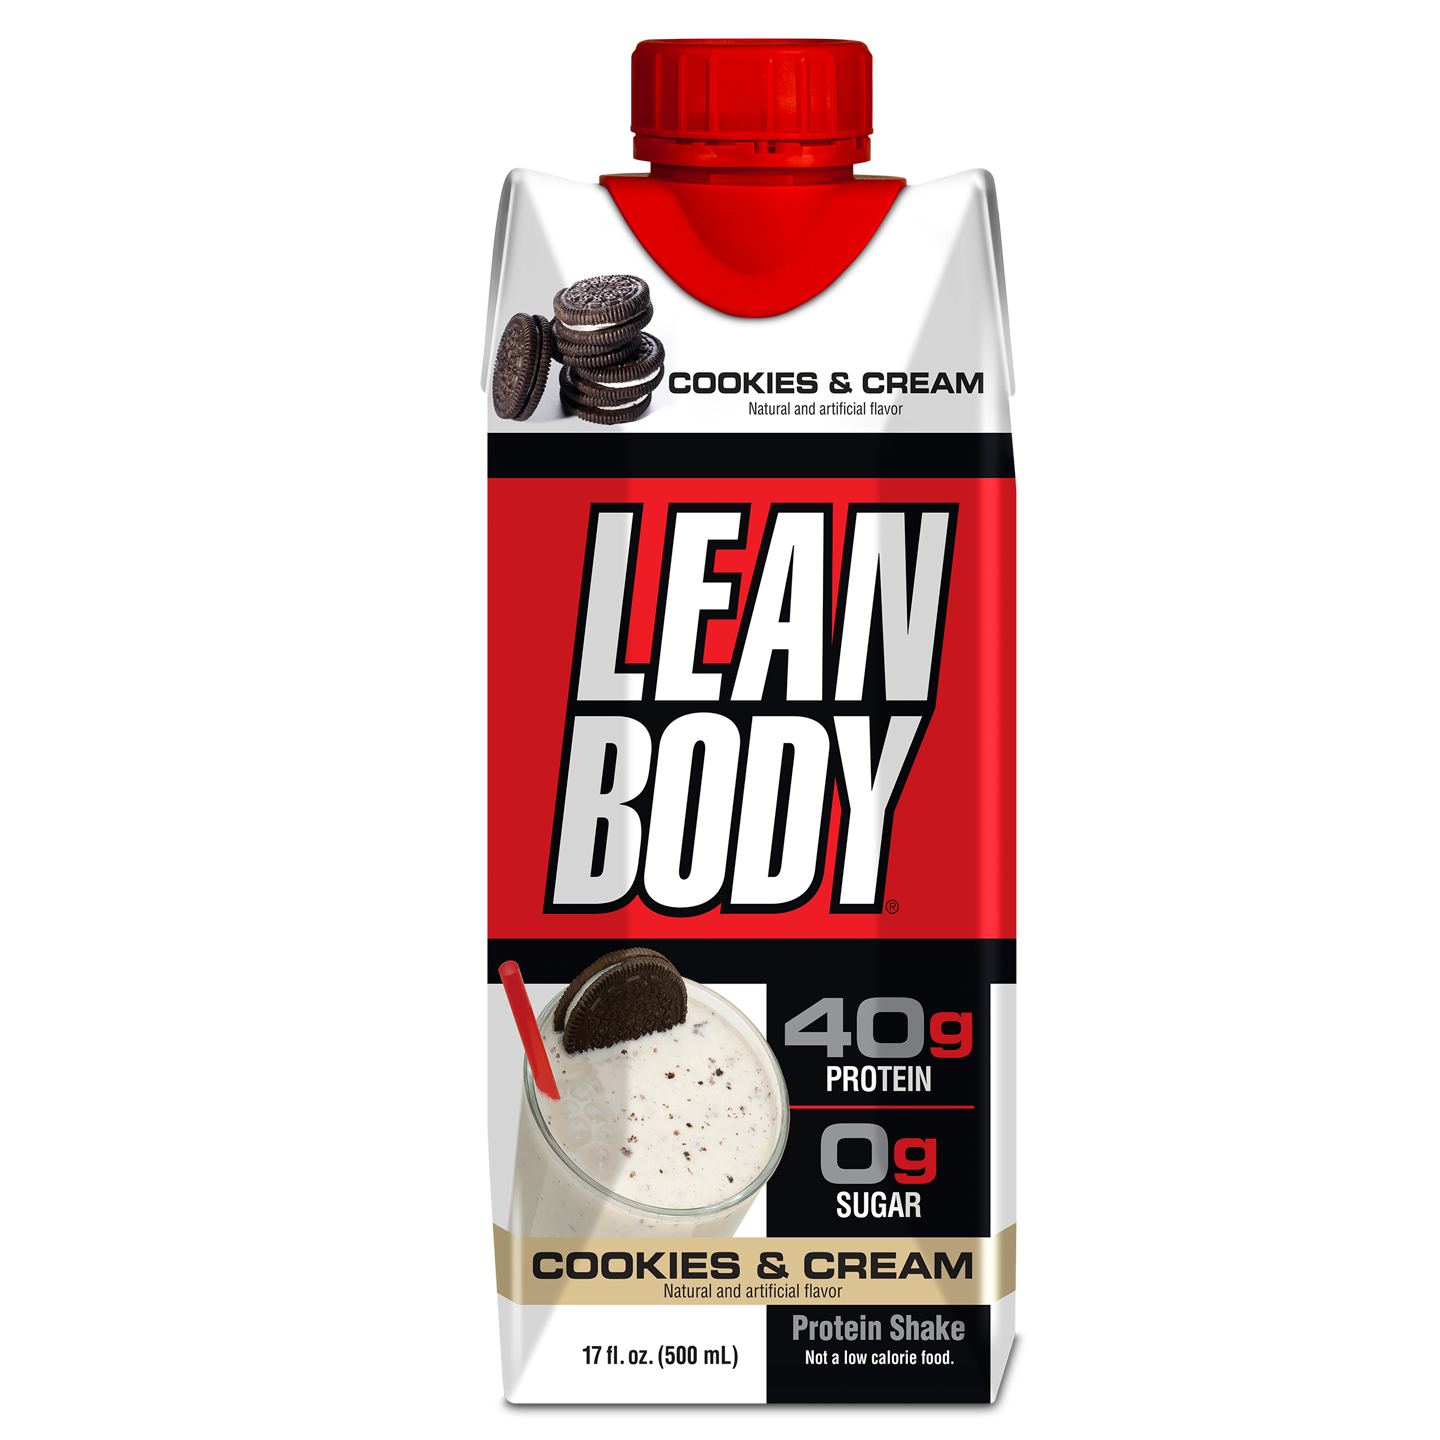 Lean Body Ready-to-Drink Protein Shake (17oz) 12 Pack - S&S